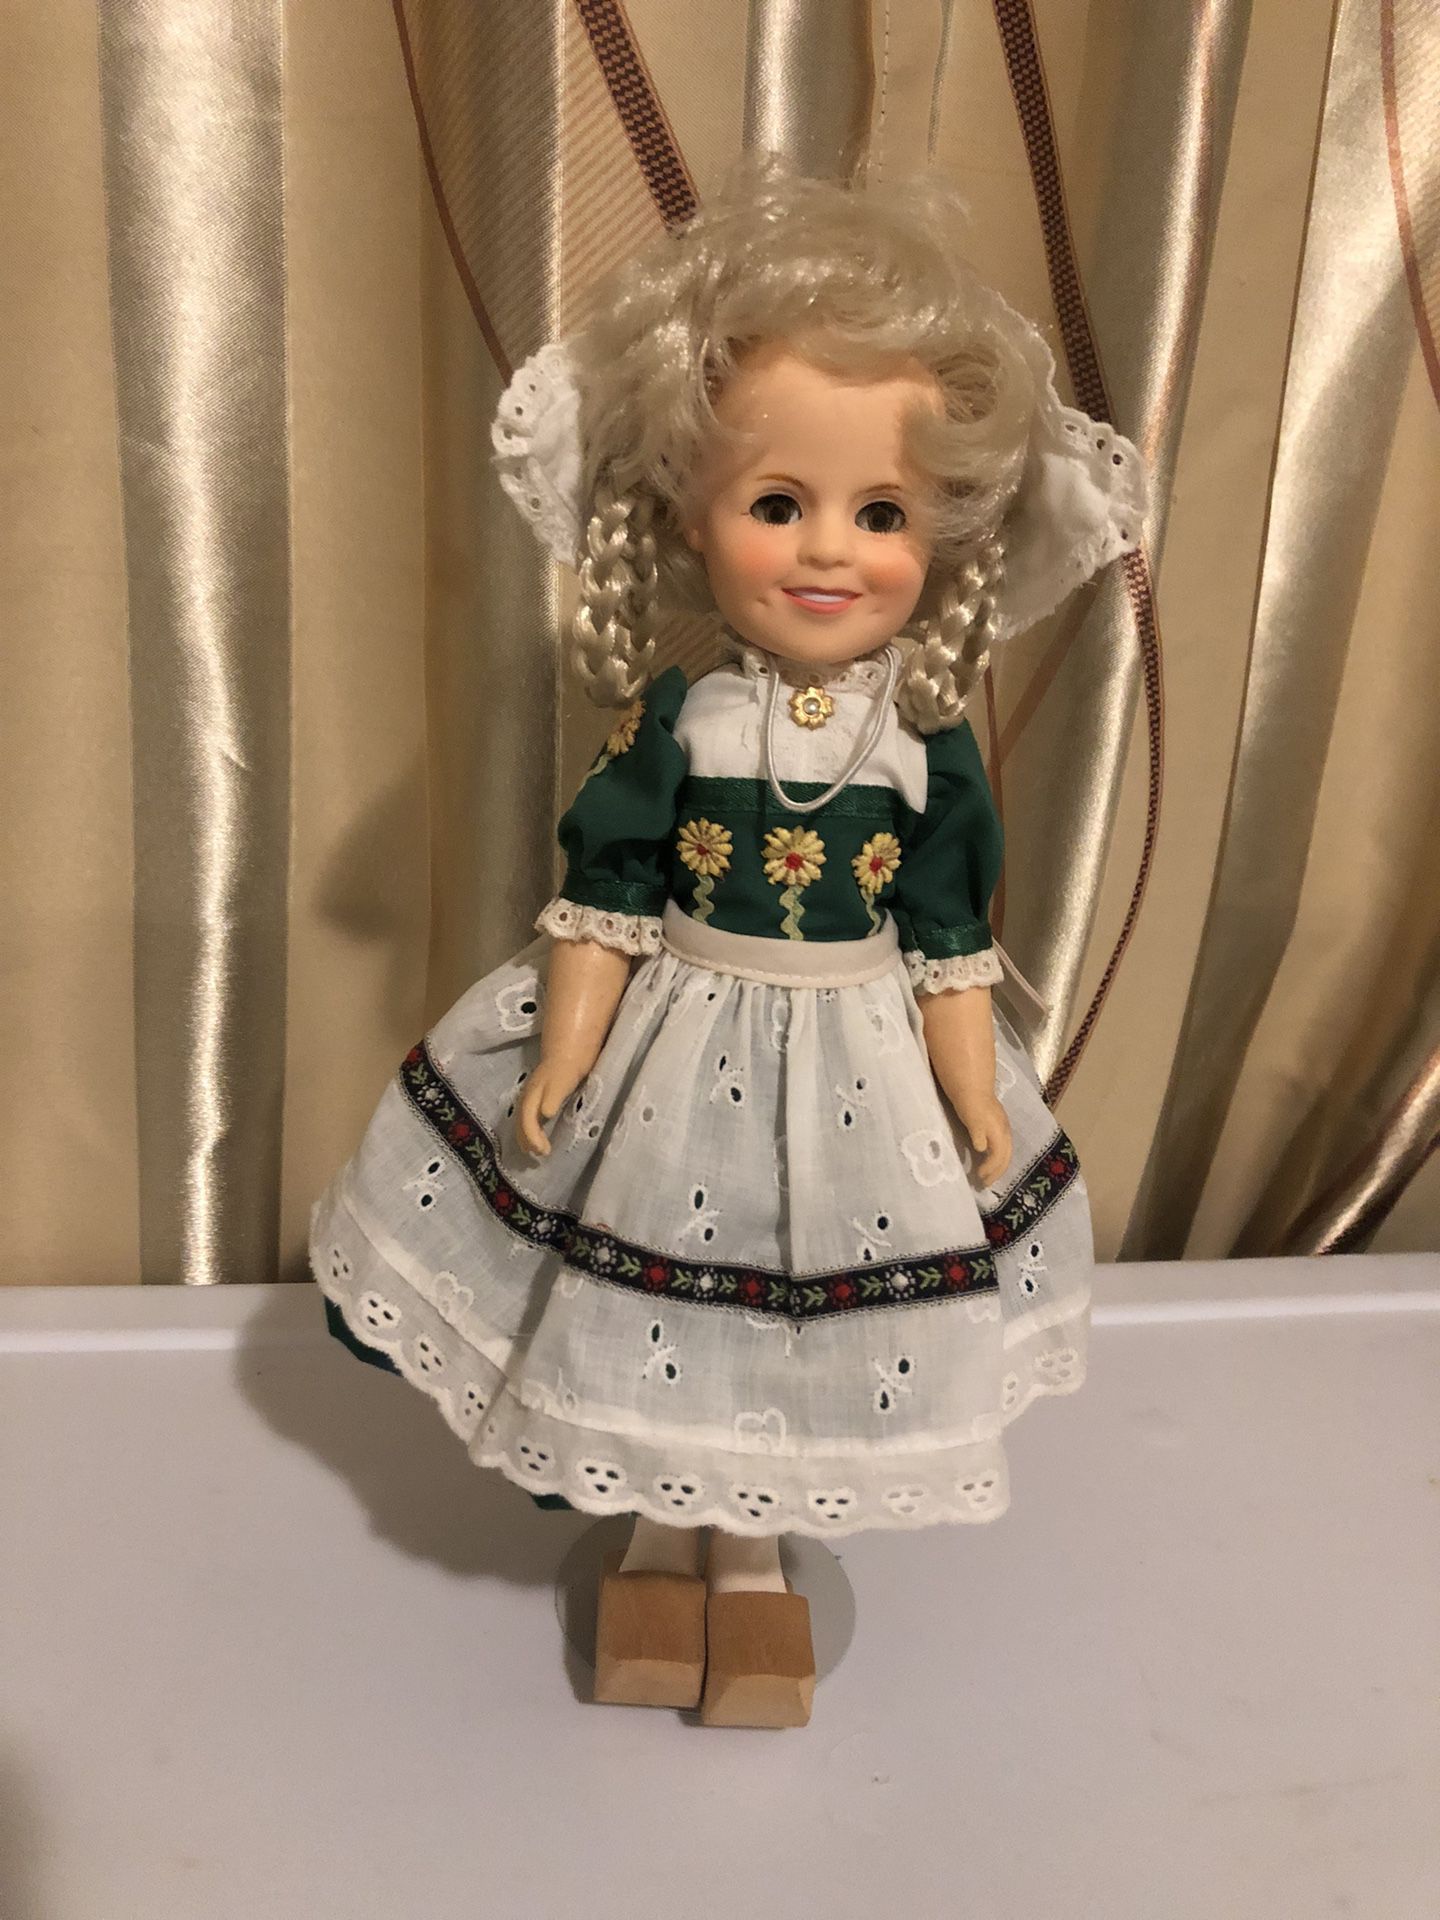 Vintage 1984 Shirley Temple Doll 